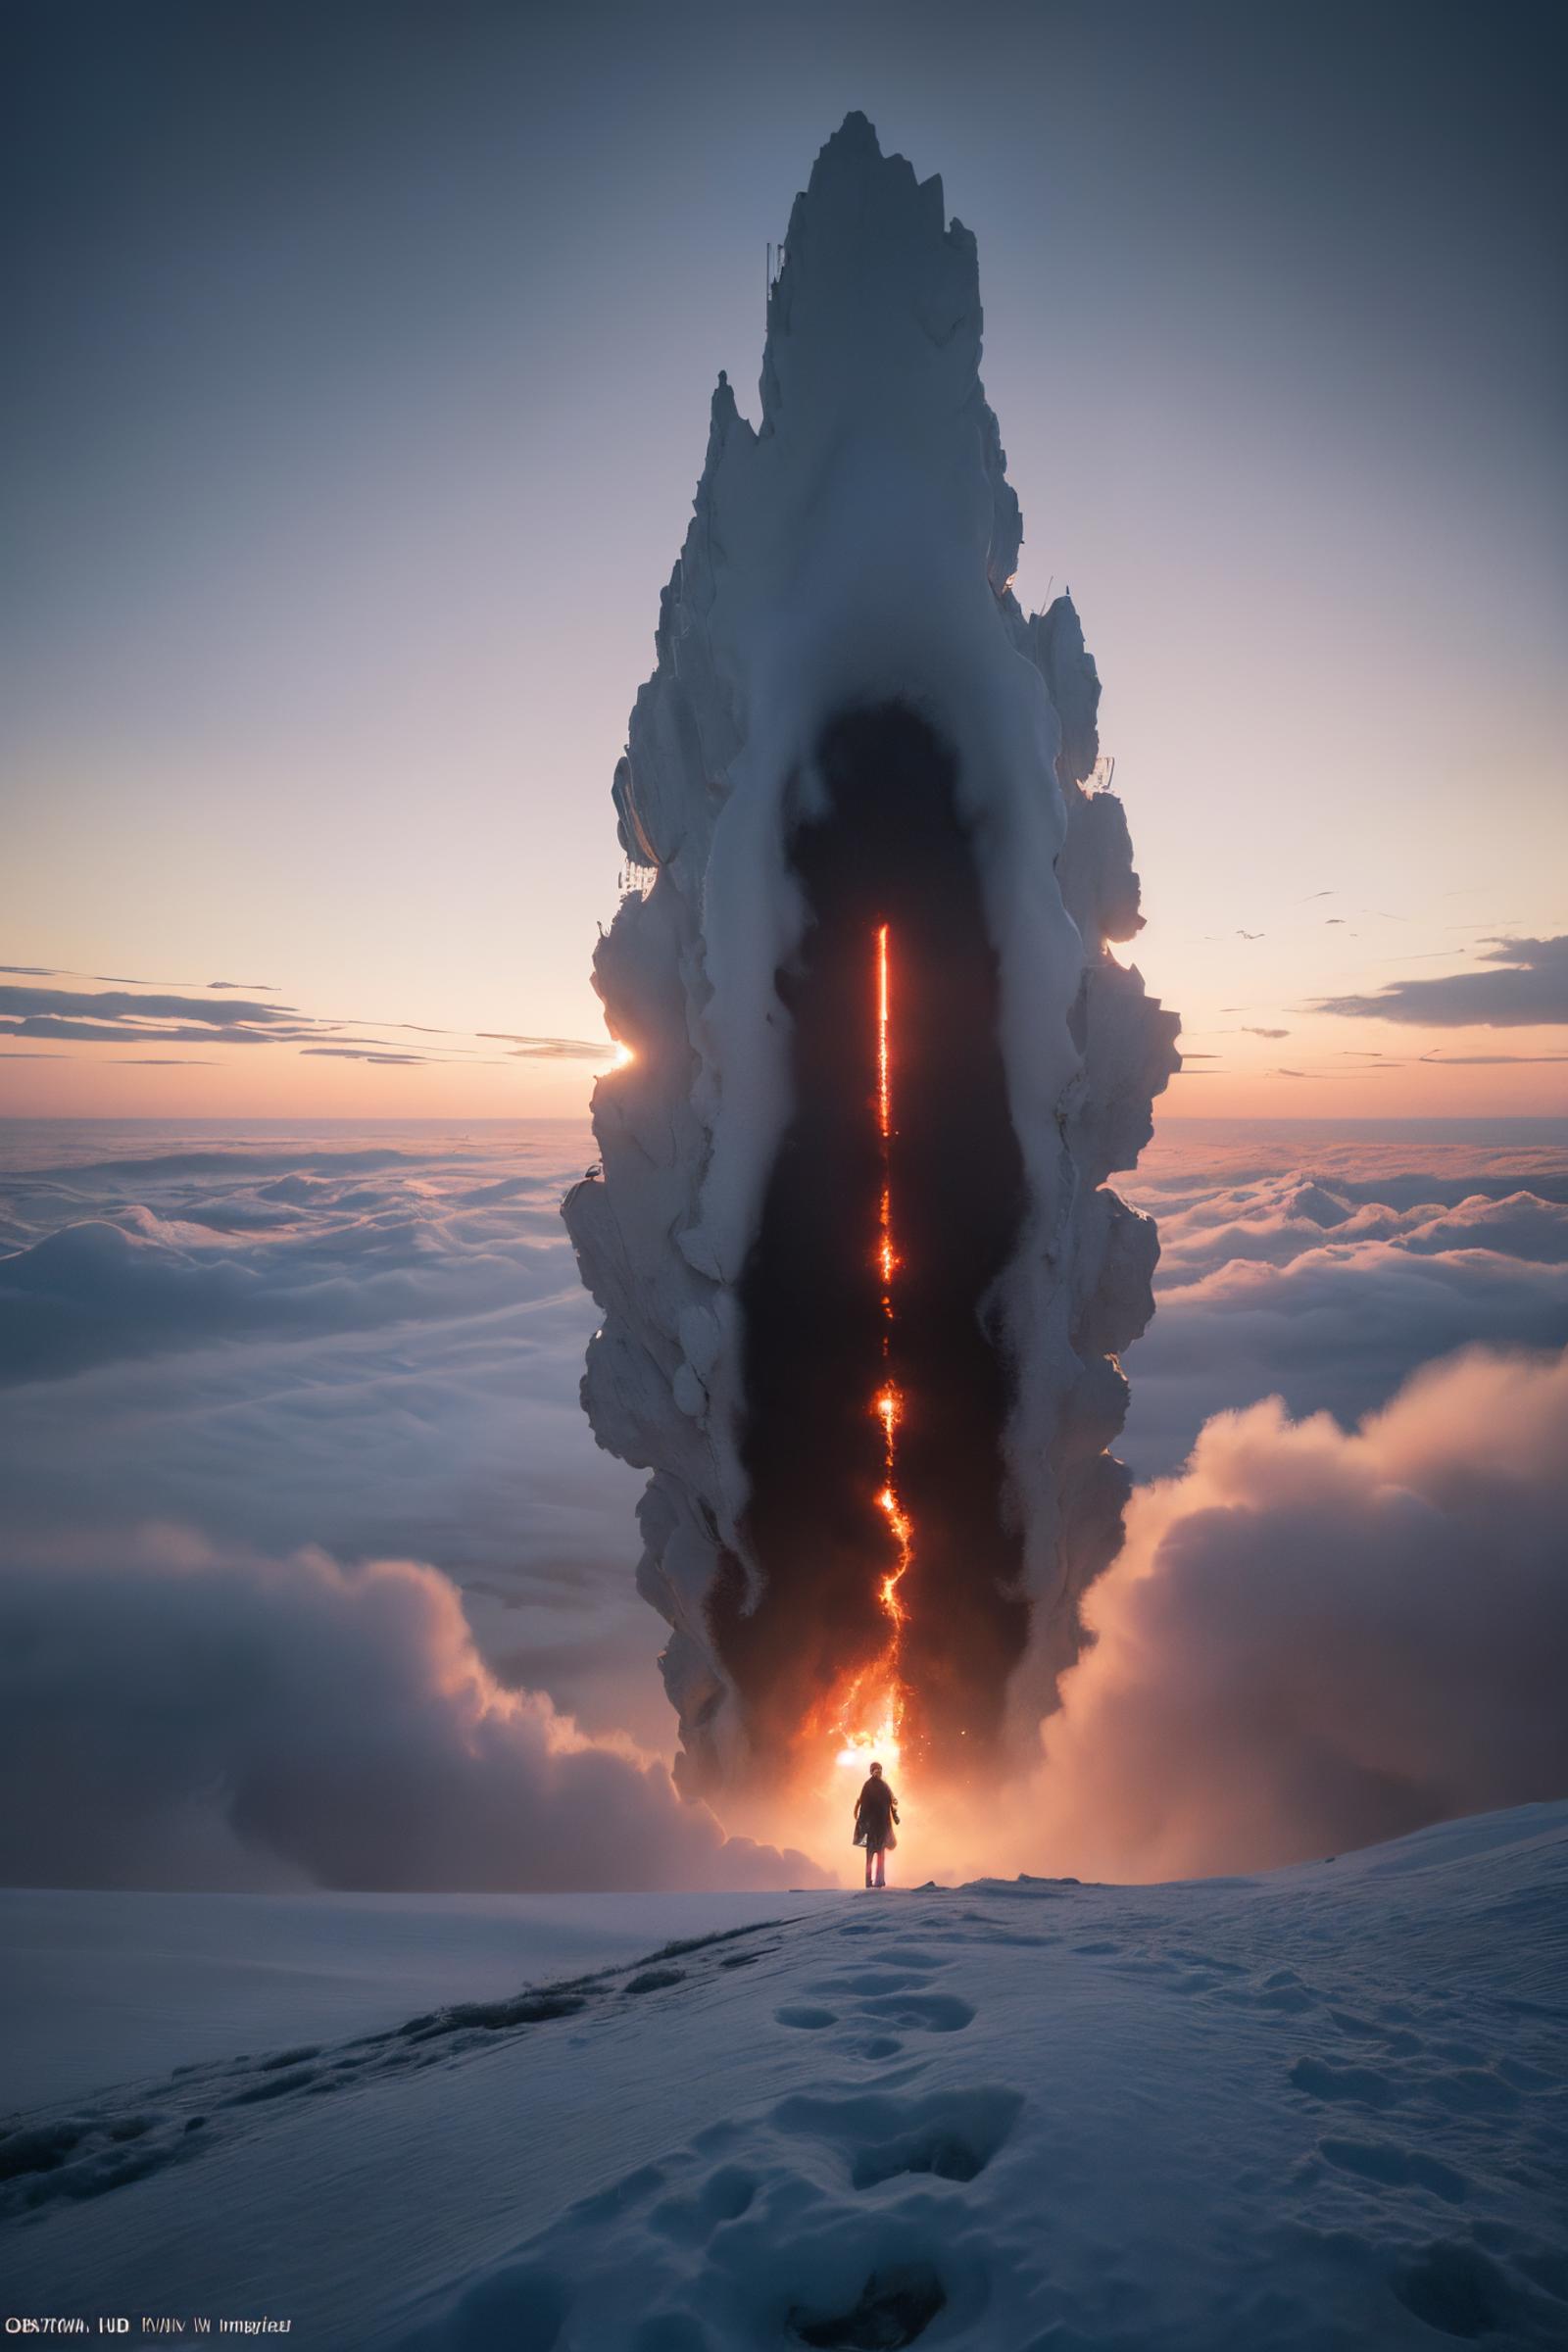 A person walking up a mountain towards a massive icy structure with a shaft of light coming out of it.